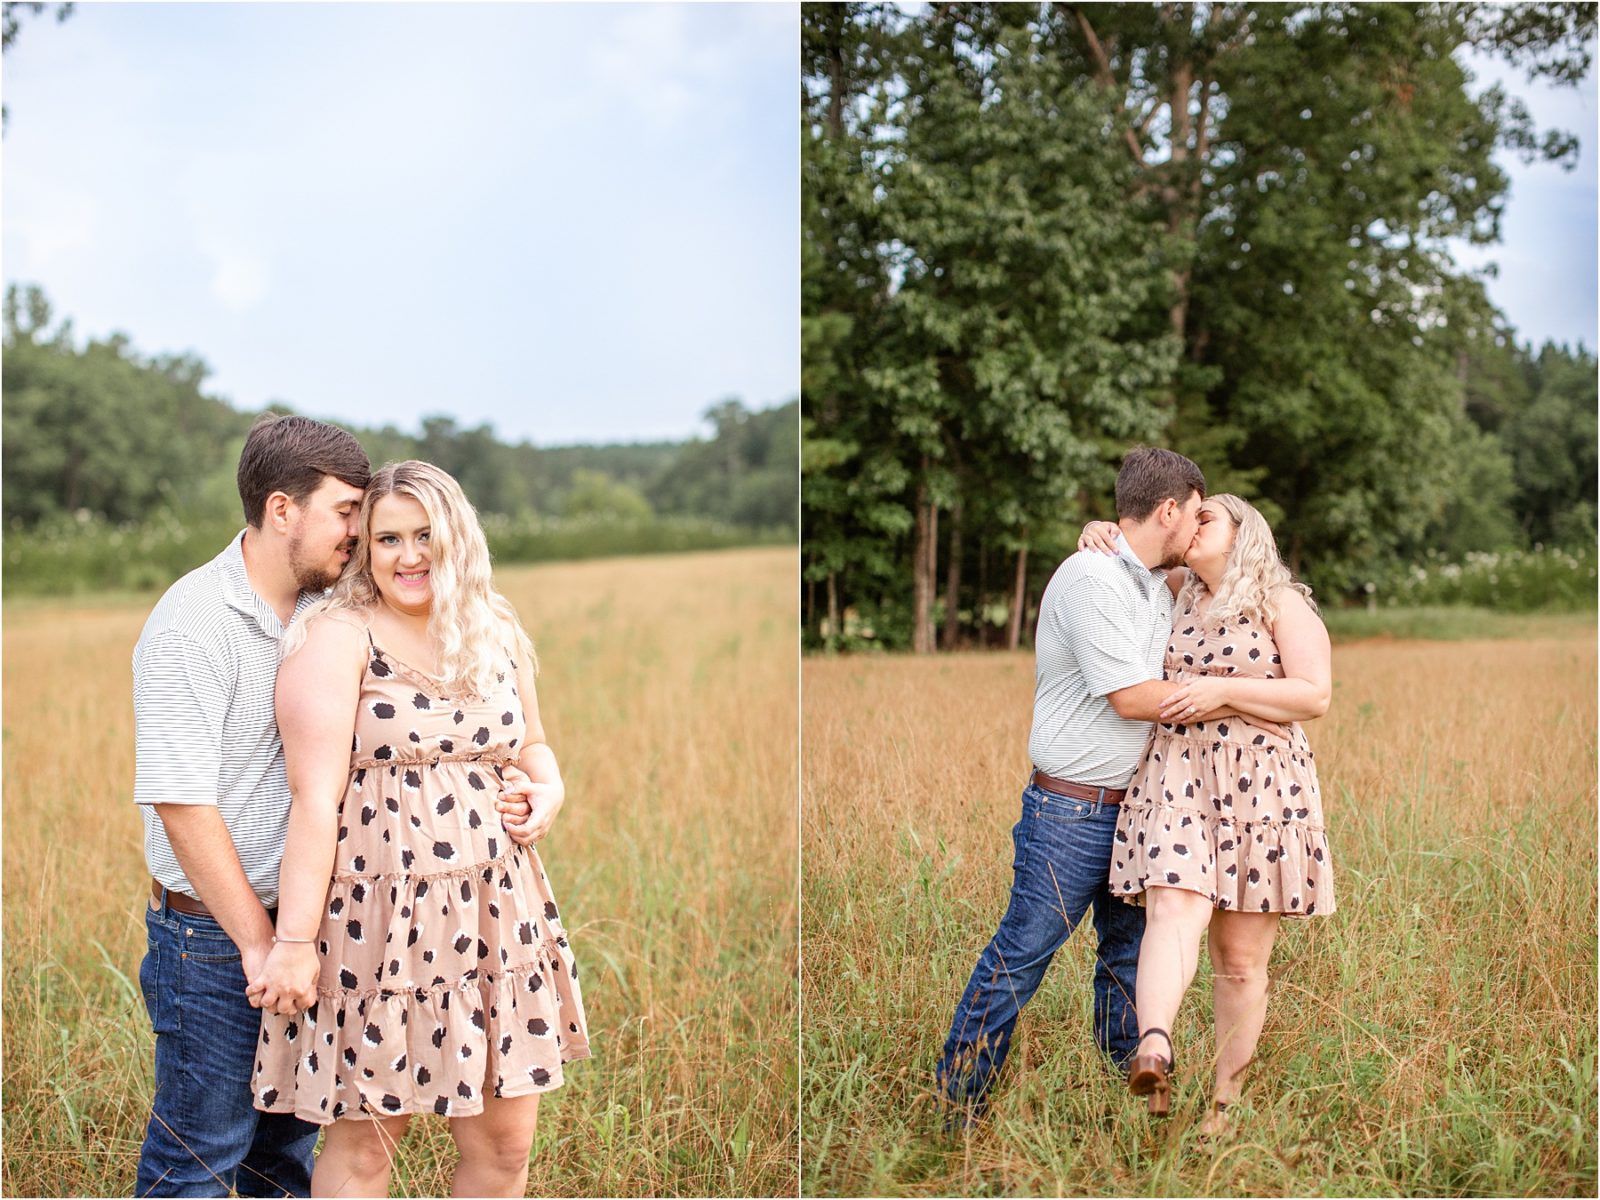 Heyward Manor engagement pictures in Iva